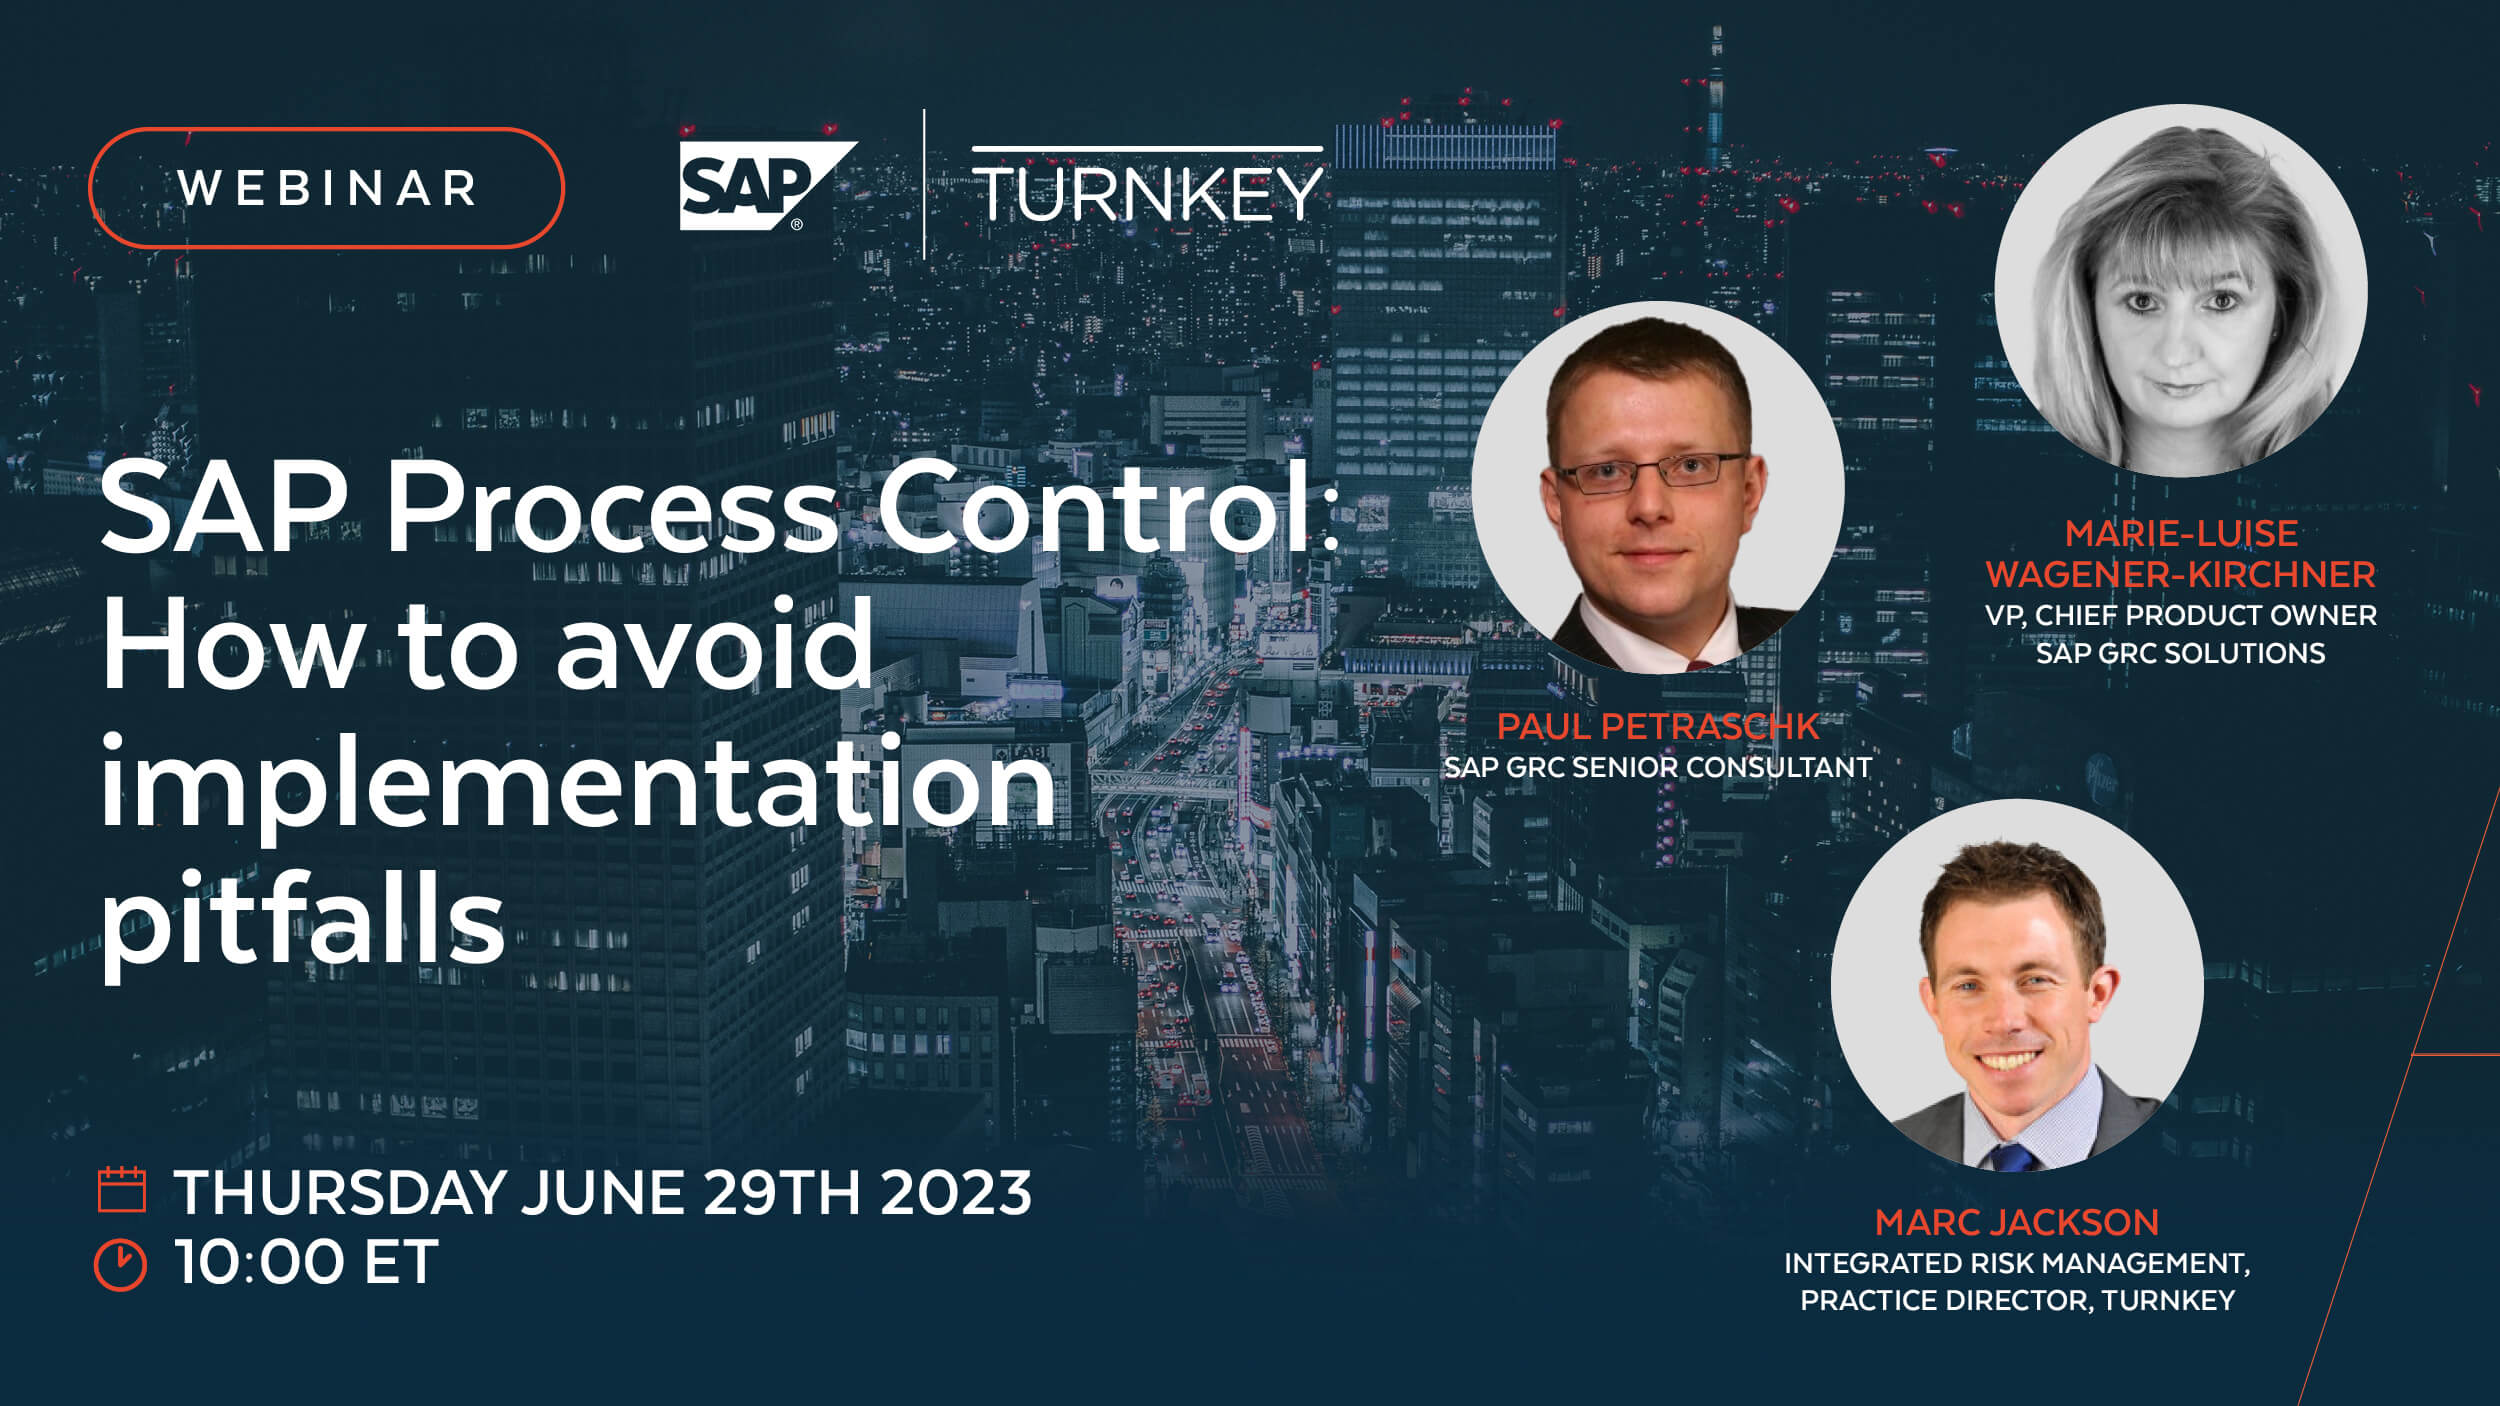 Turnkey SAP Process Control How to avoid implementation pitfalls US (1)